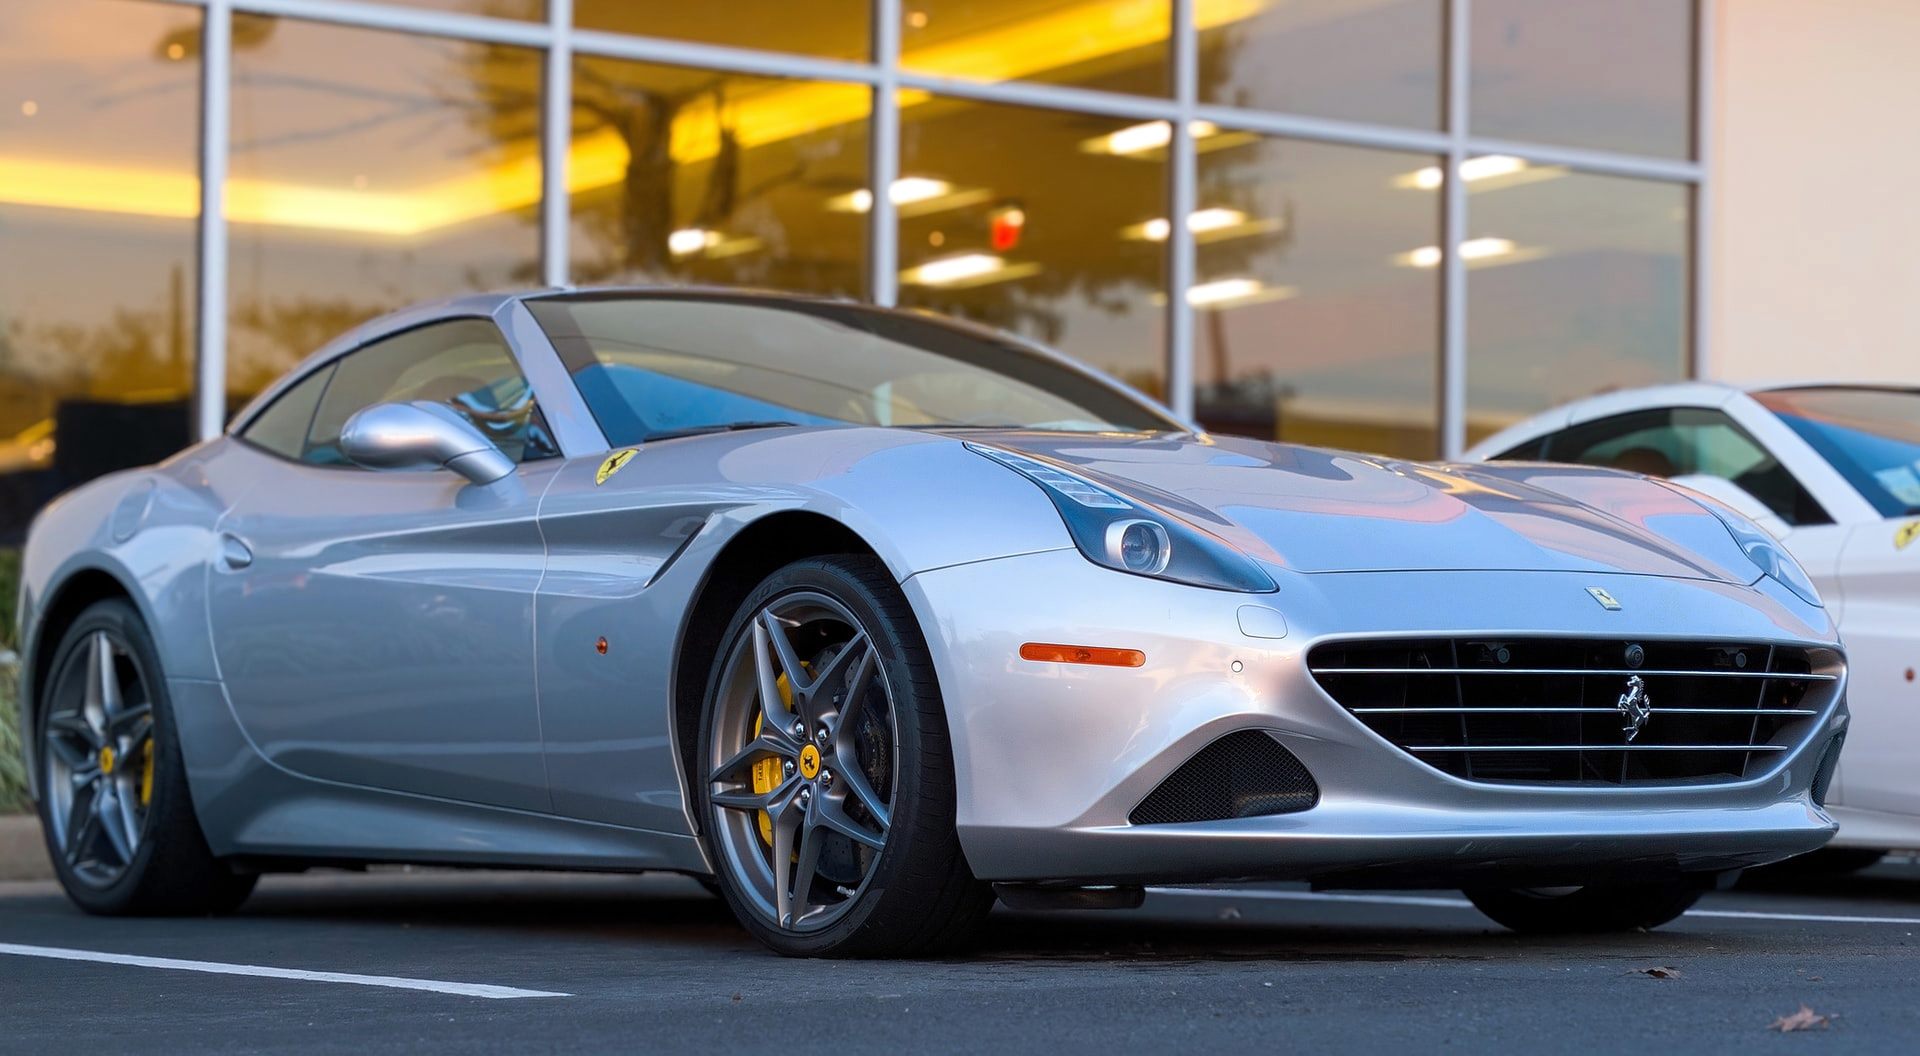 A silver ferrari is parked in front of a building.